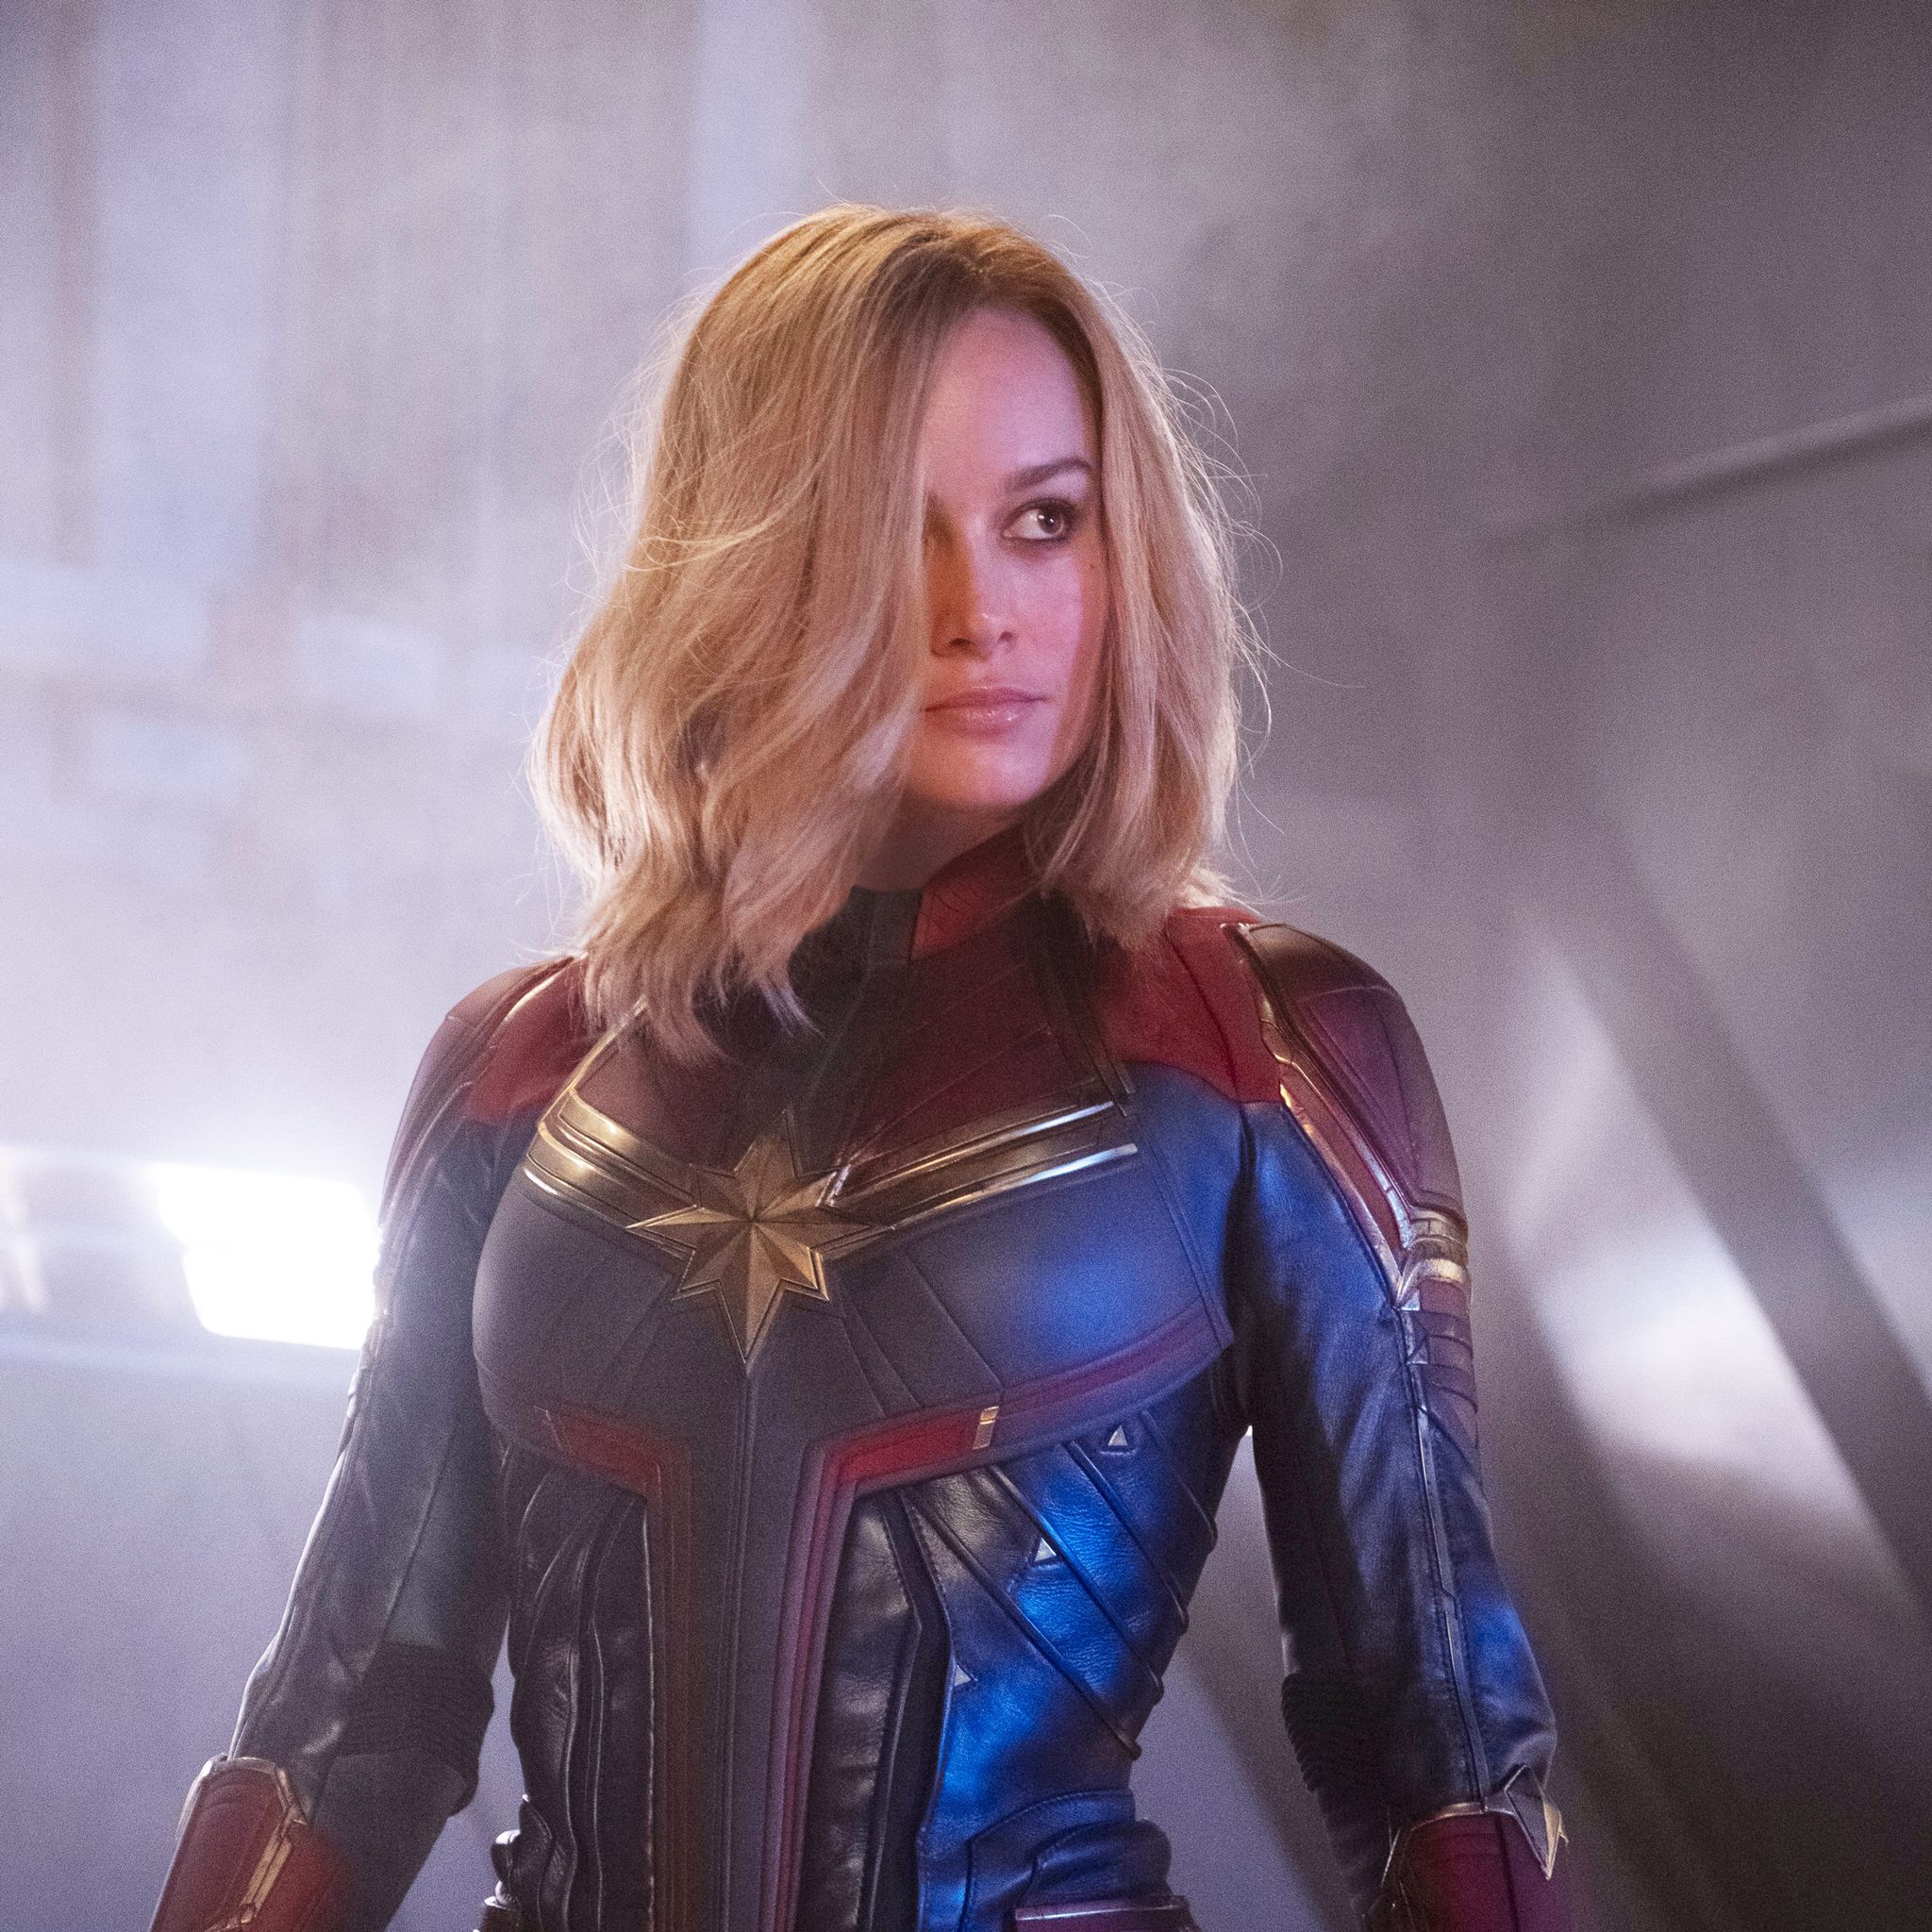 Captain Marvel highlights the major problem with female superheroes